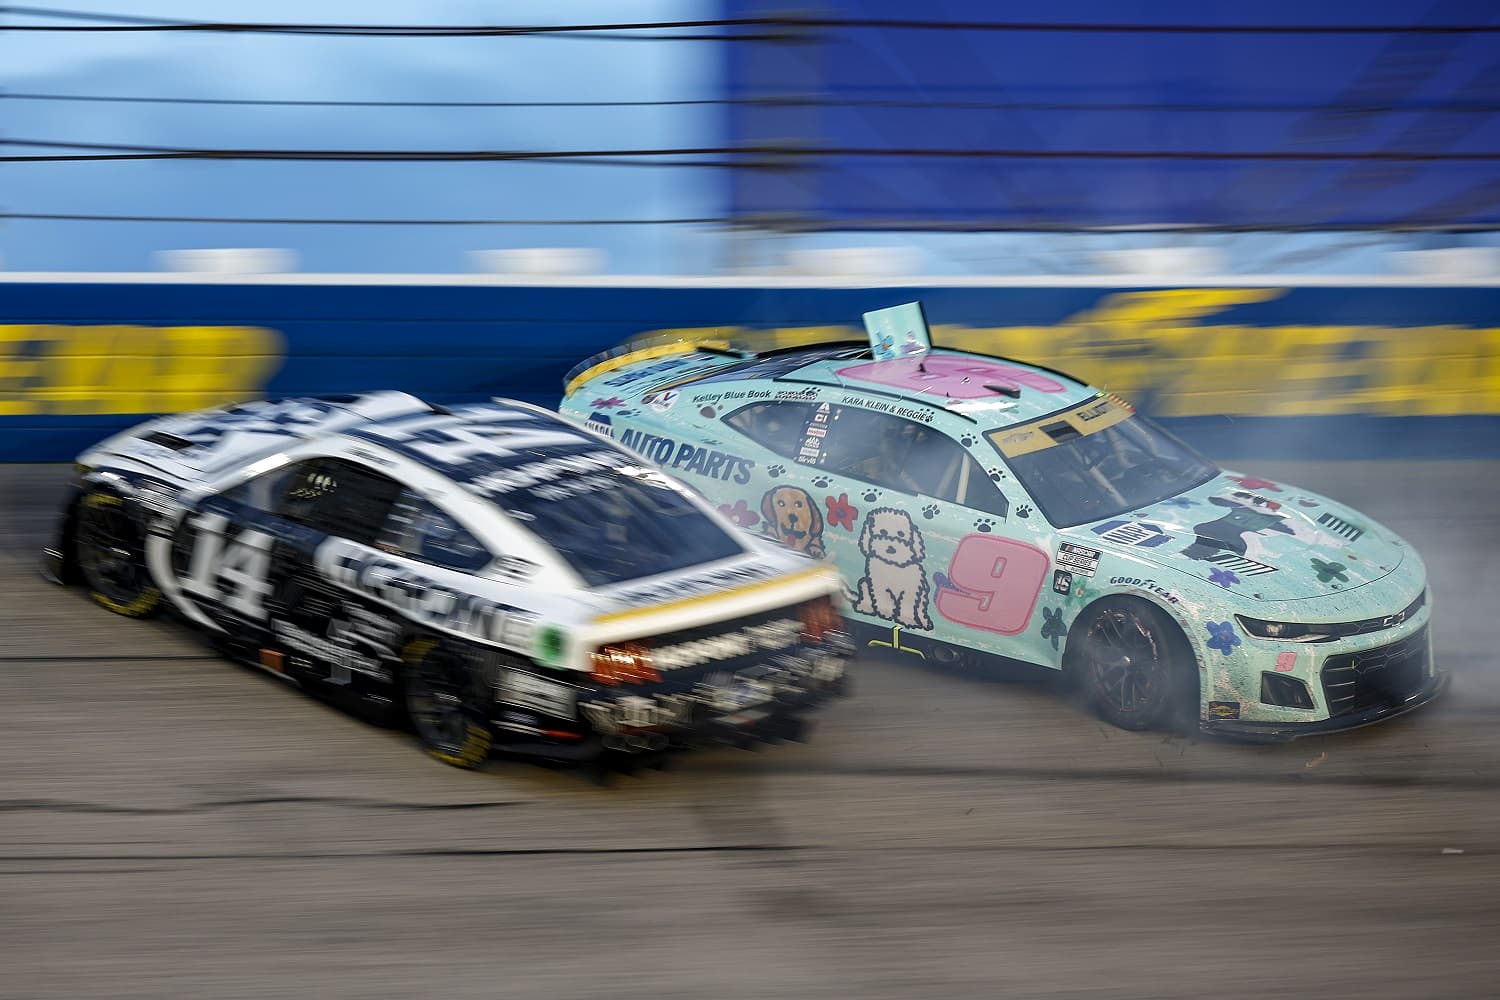 Chase Elliott, driver of the No. 9 Chevrolet, and Chase Briscoe, driver of the No. 14 Ford, spin during the NASCAR Cup Series Cook Out Southern 500 at Darlington Raceway on Sept. 4, 2022.